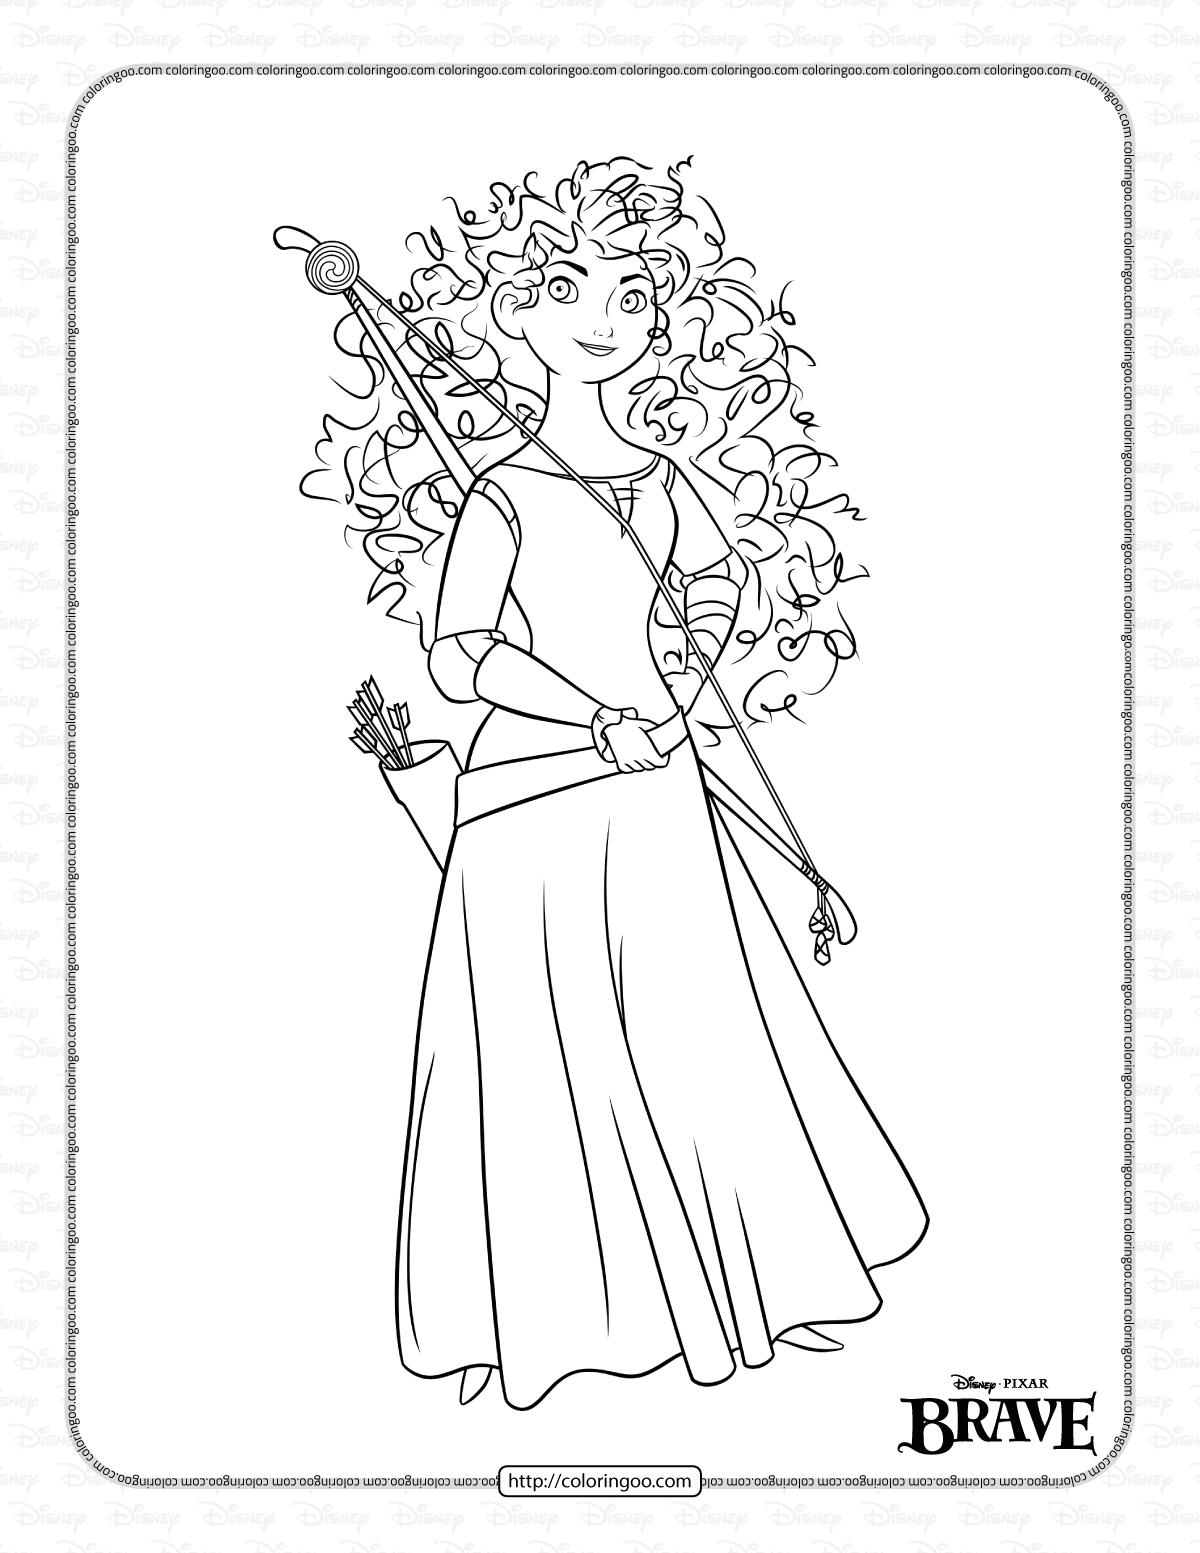 disney brave coloring pages for kids